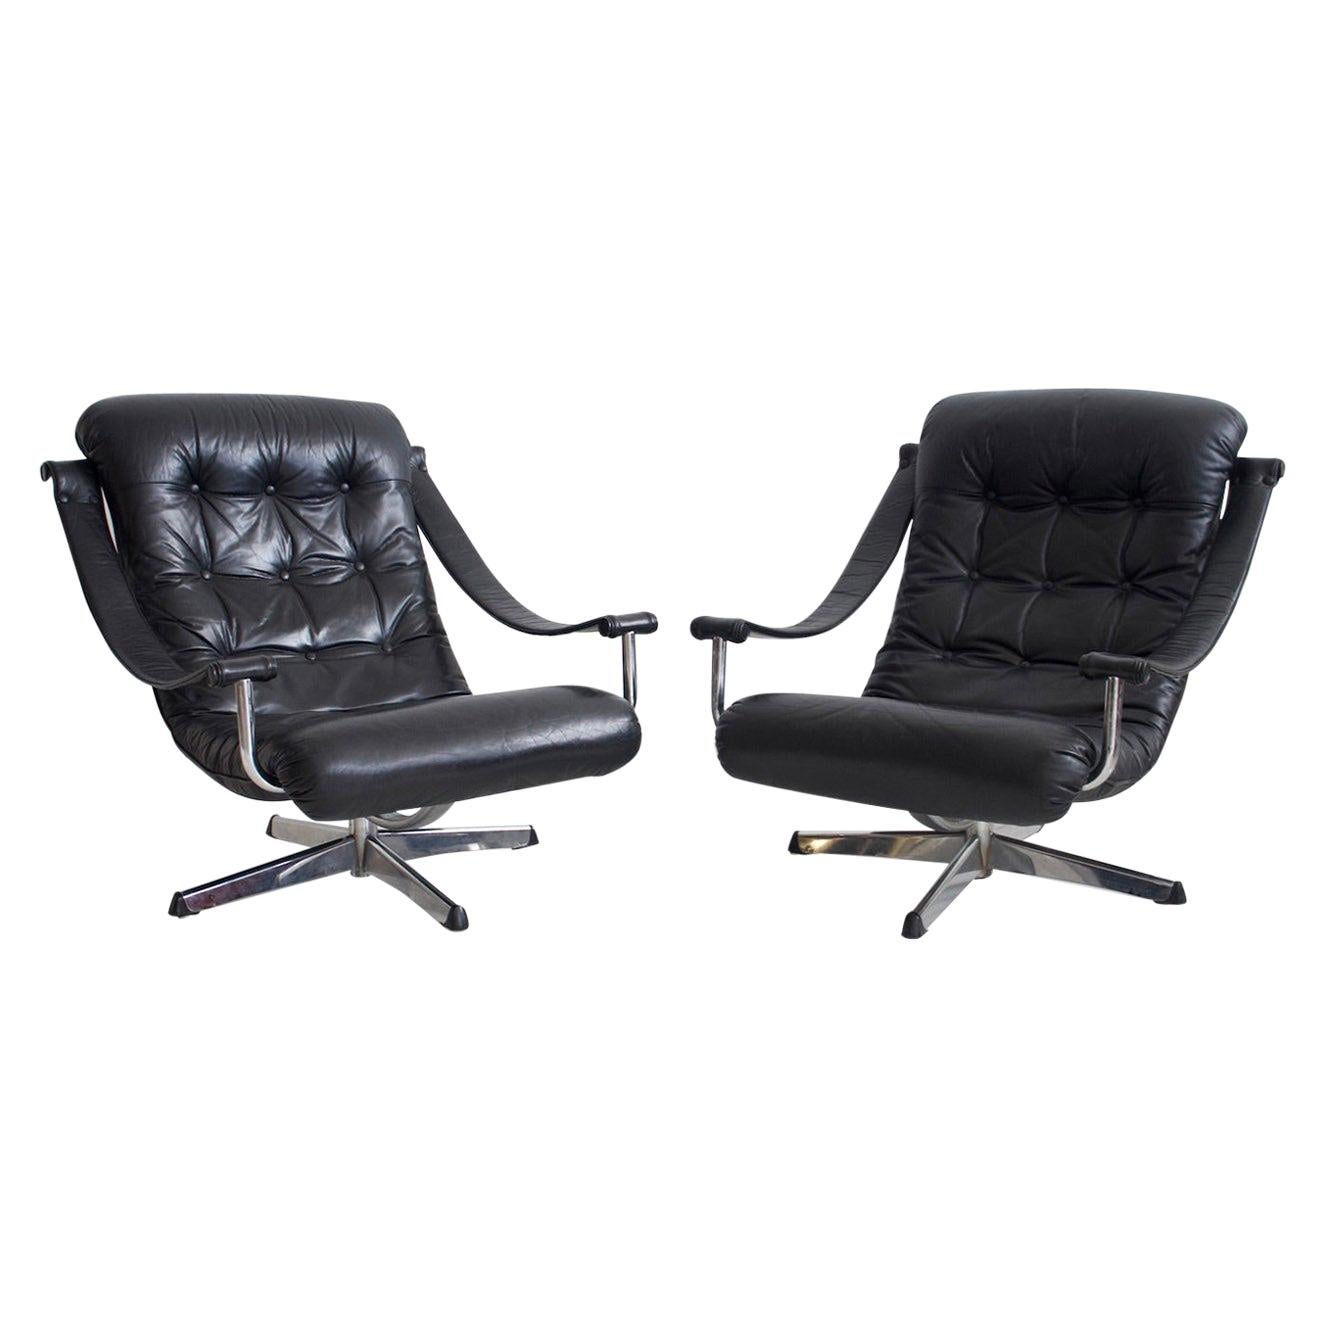 Pair of Black Leather Swivel Chairs by Göte Möbler